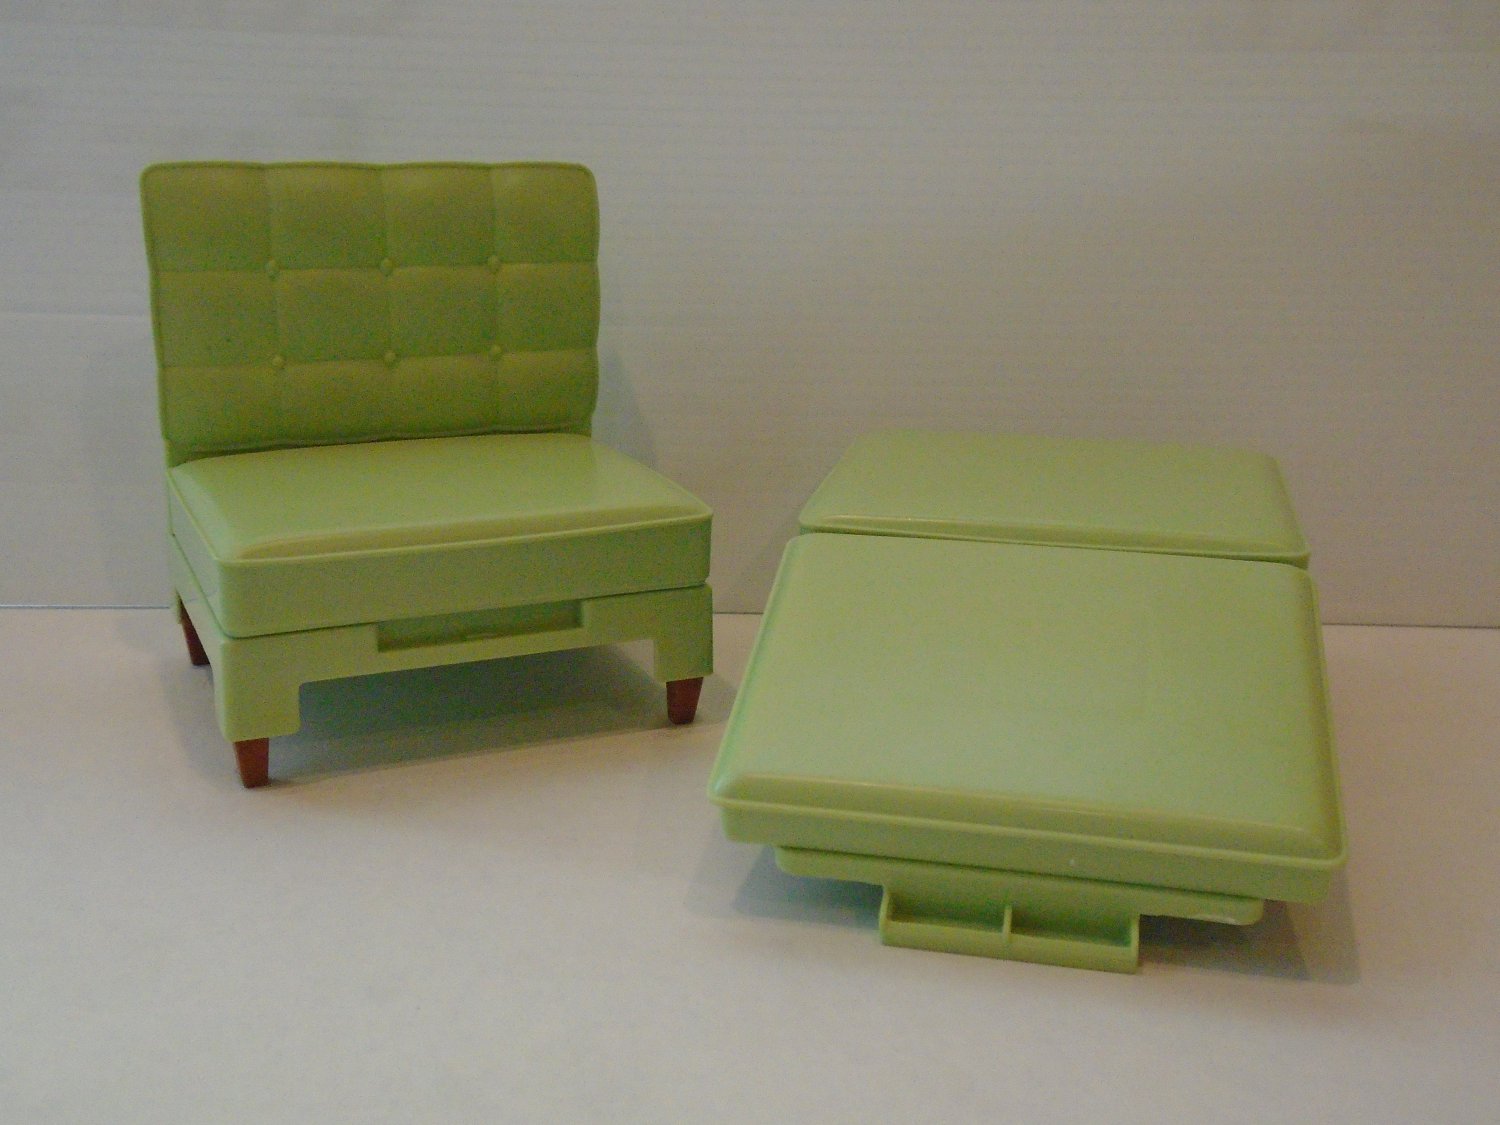 VINTAGE BARBIE GREEN CHAIR AND OTTOMAN CONVERTS TO BED CLB 968